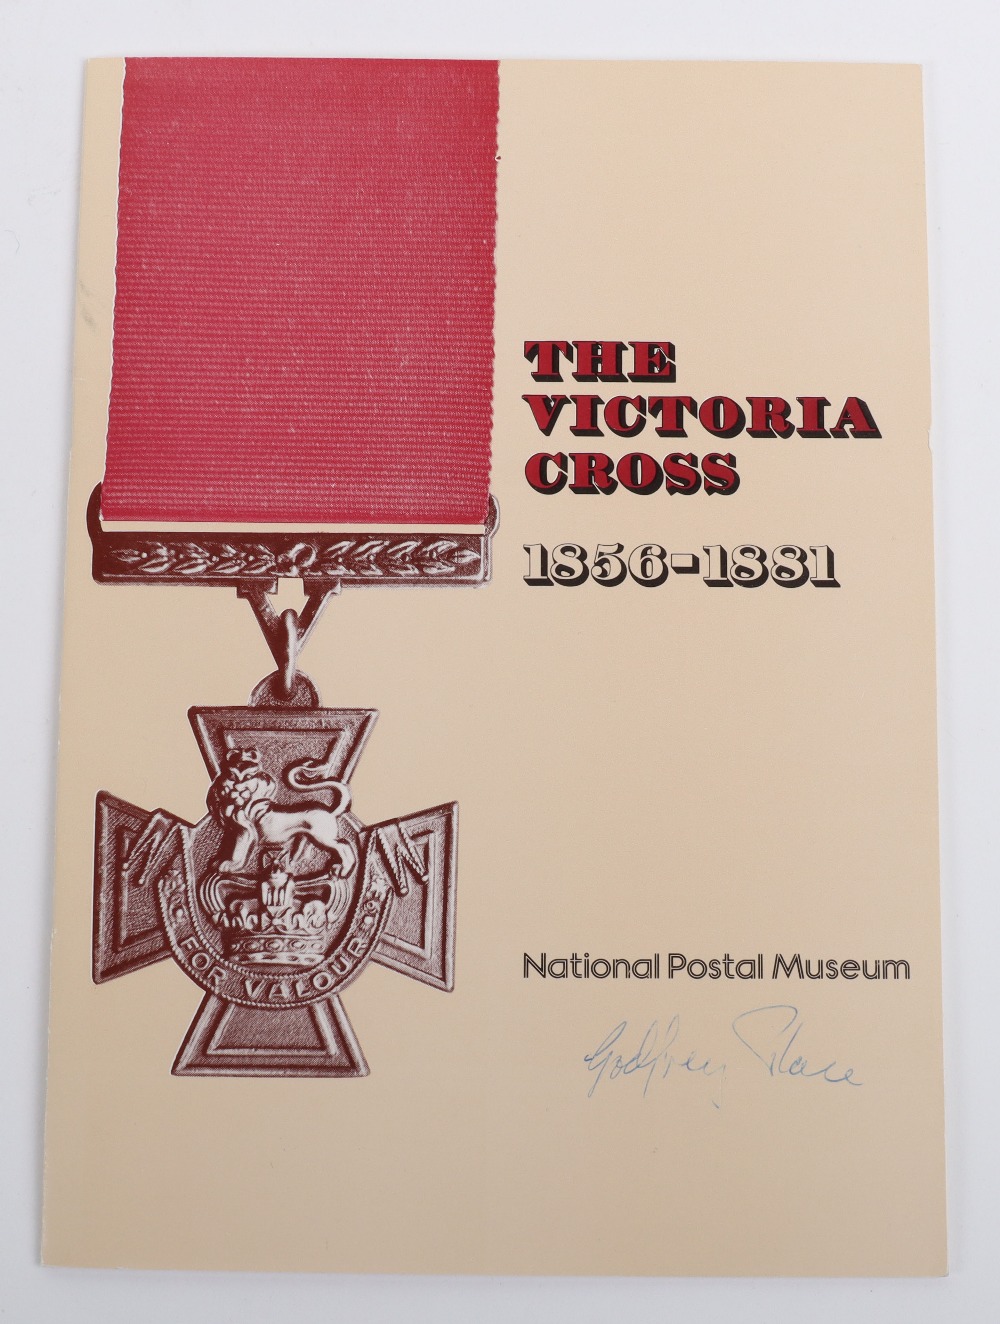 The Victoria Cross 1856-1881 Booklet Signed by Royal Navy Victoria Cross Winner Rear Admiral Basil C - Image 9 of 15